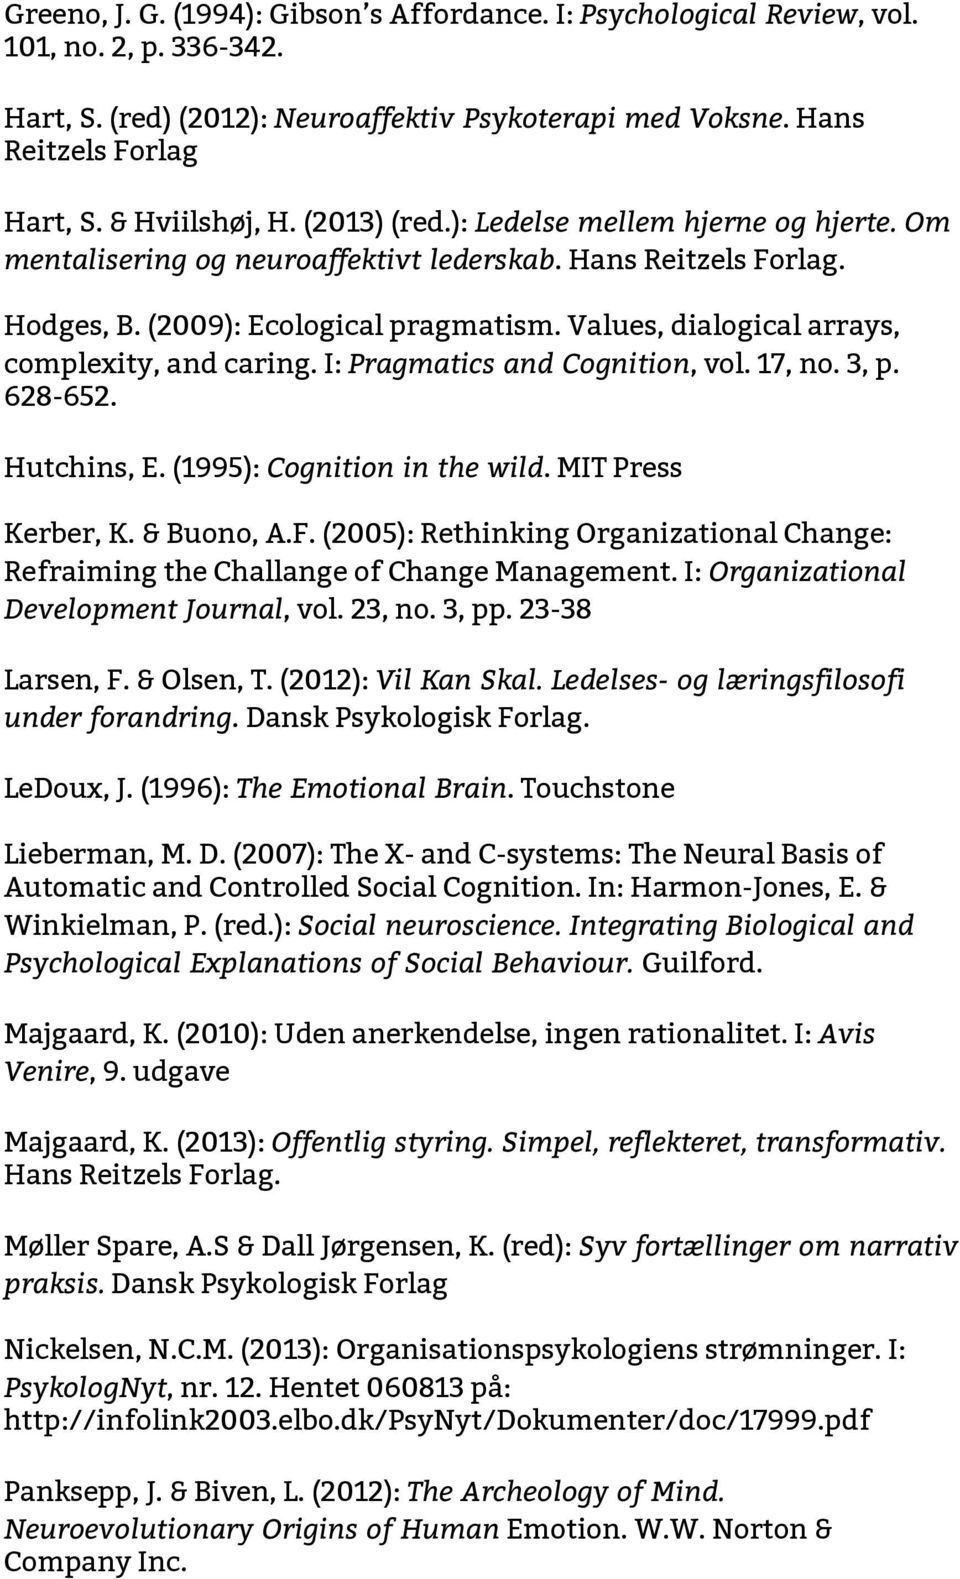 Values, dialogical arrays, complexity, and caring. I: Pragmatics and Cognition, vol. 17, no. 3, p. 628-652. Hutchins, E. (1995): Cognition in the wild. MIT Press Kerber, K. & Buono, A.F.